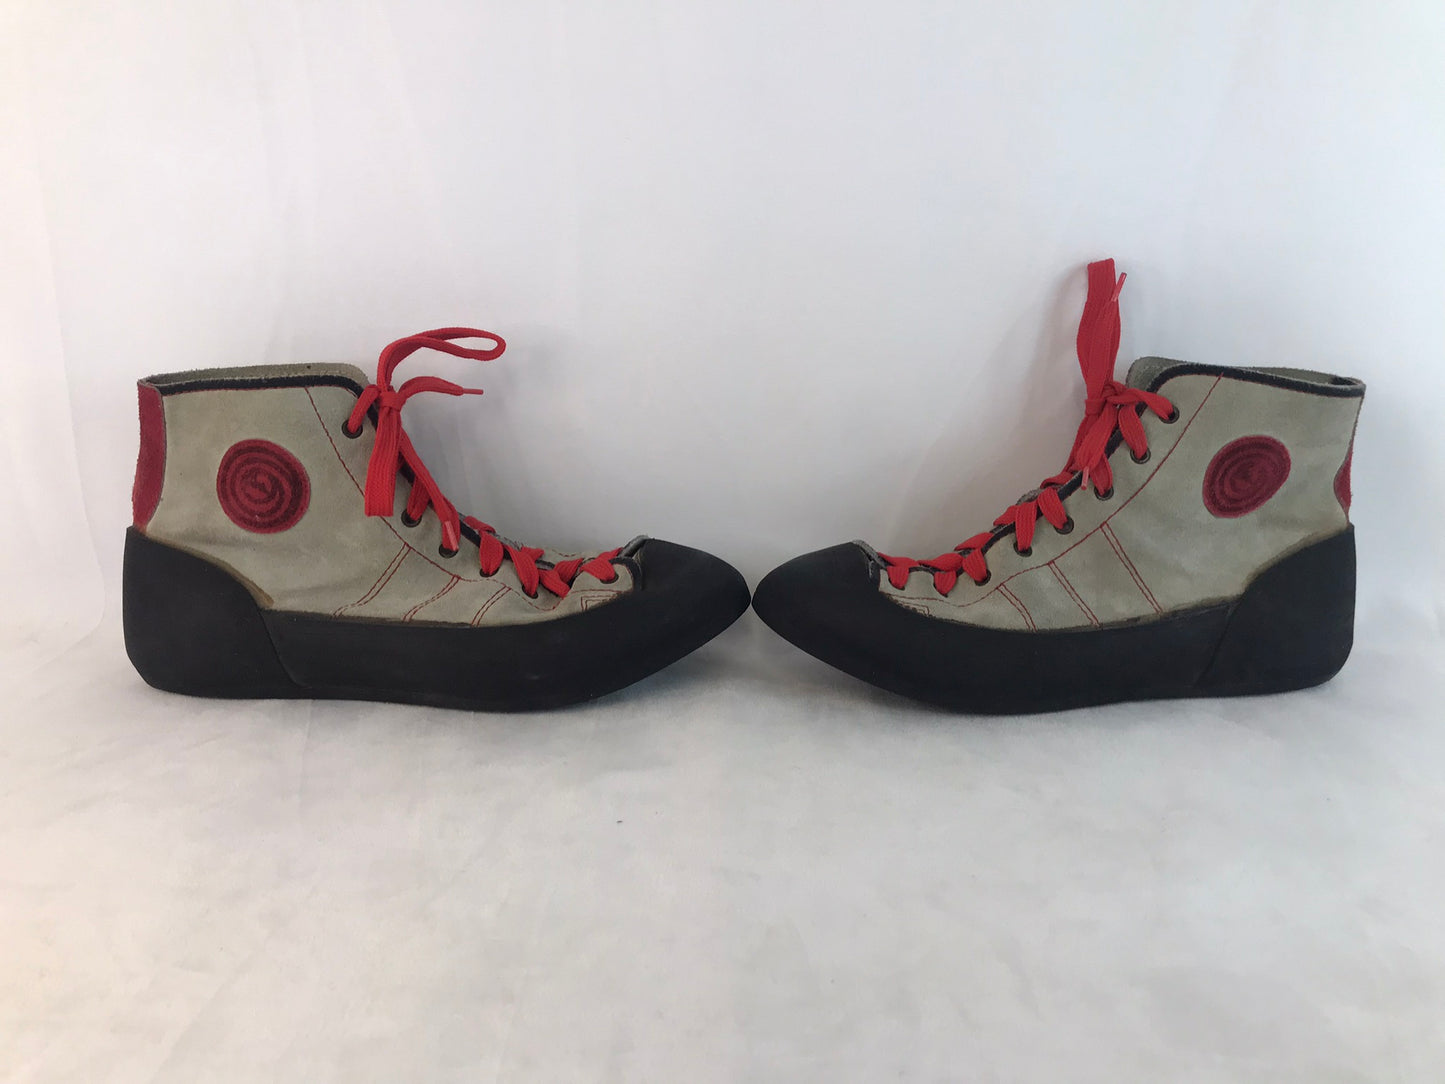 Rock Climbing Shoes  Men's Size 11 Boreal Spain Leather Suade Black Red Excellent Quality